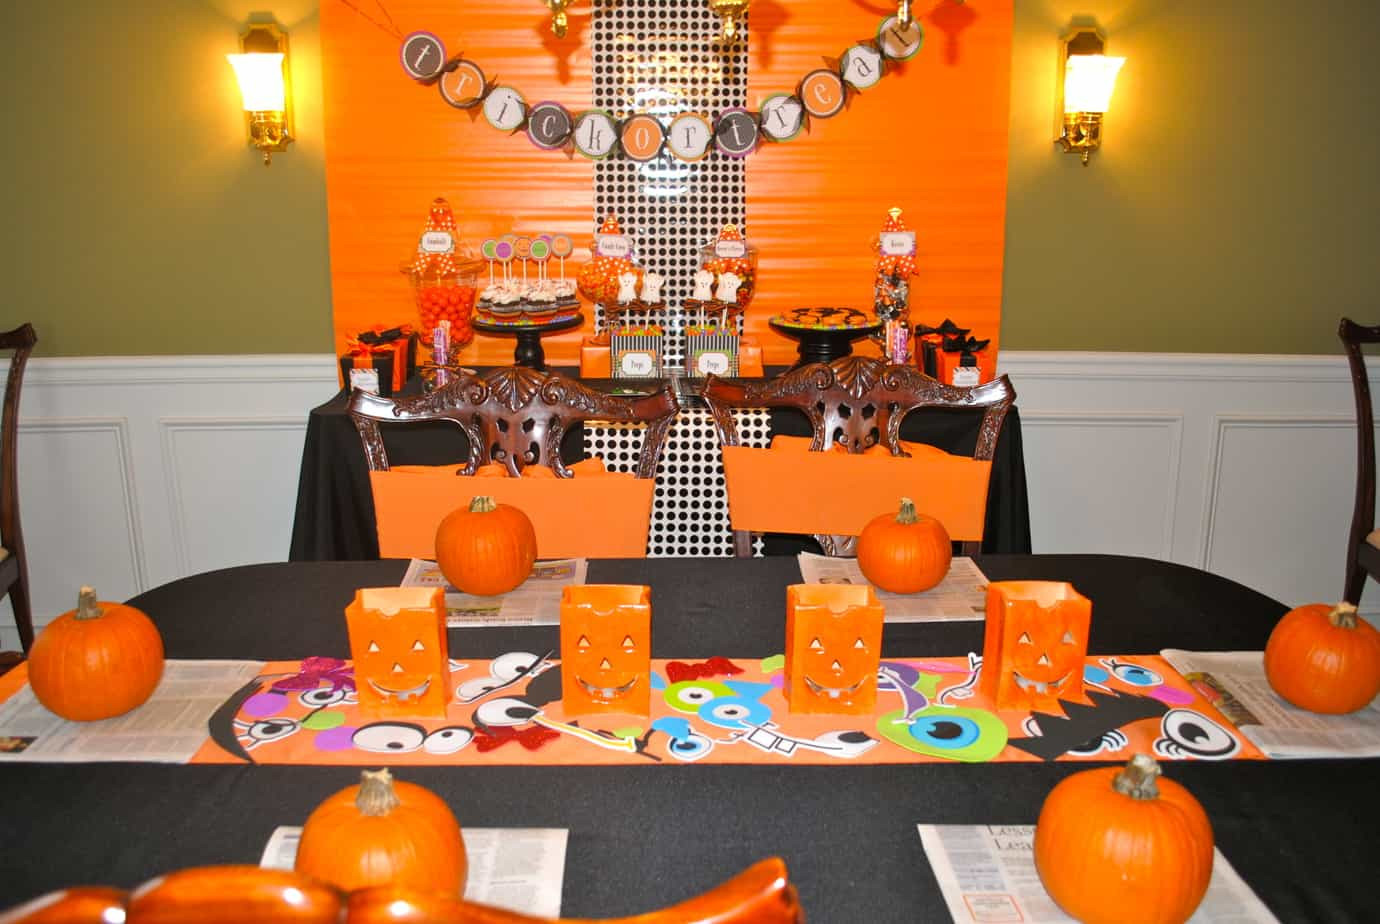 Halloween Birthday Party Decoration Ideas
 Halloween Party Ideas For Kids 2019 With Daily